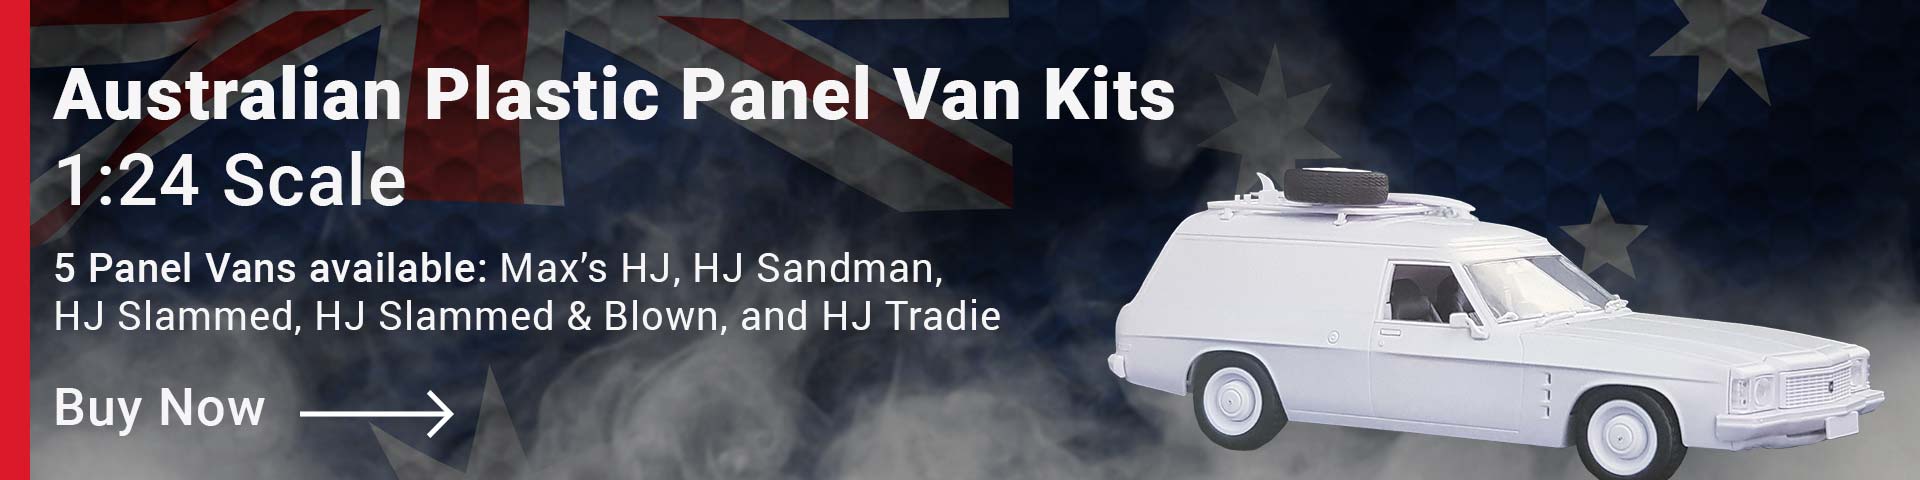 Buy the first ever Australian plastic panel van kit with 5 Holden models to choose from